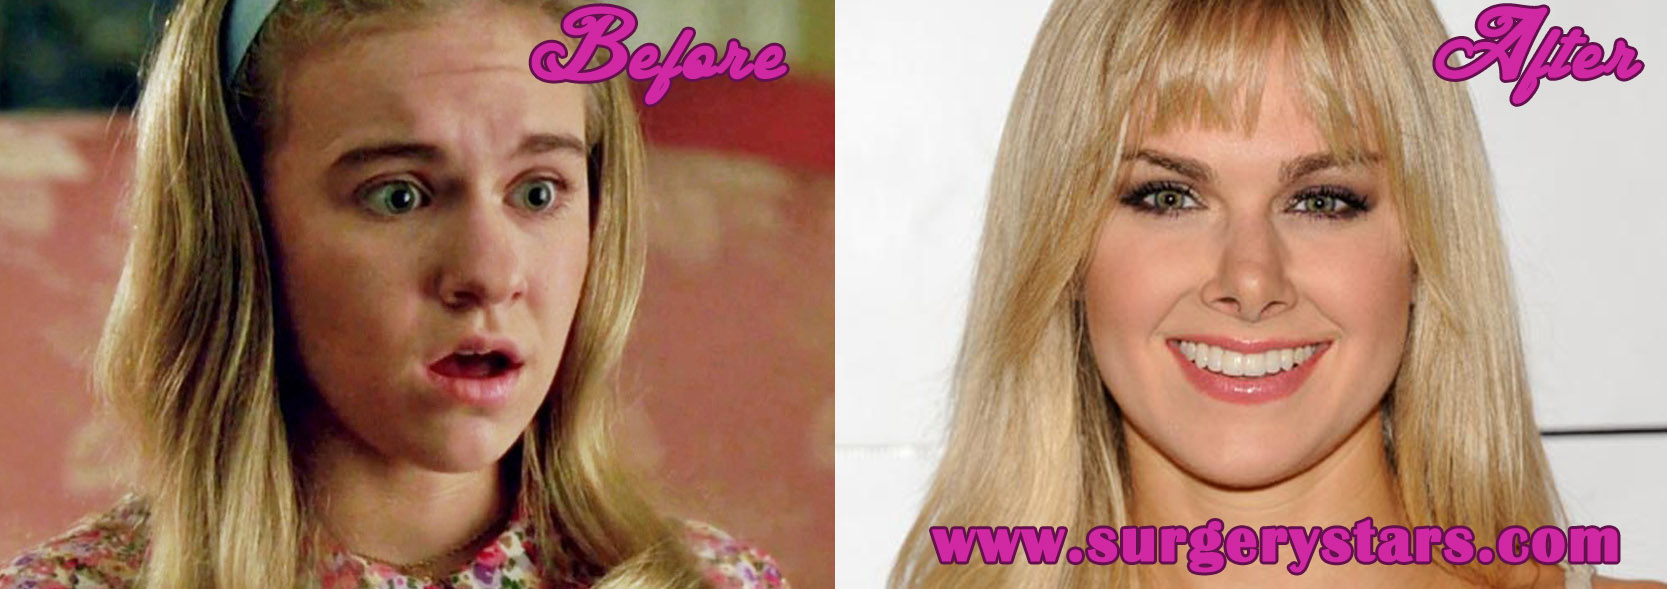 Laura Bell Bundy Nose Job - Before and After Pictures.